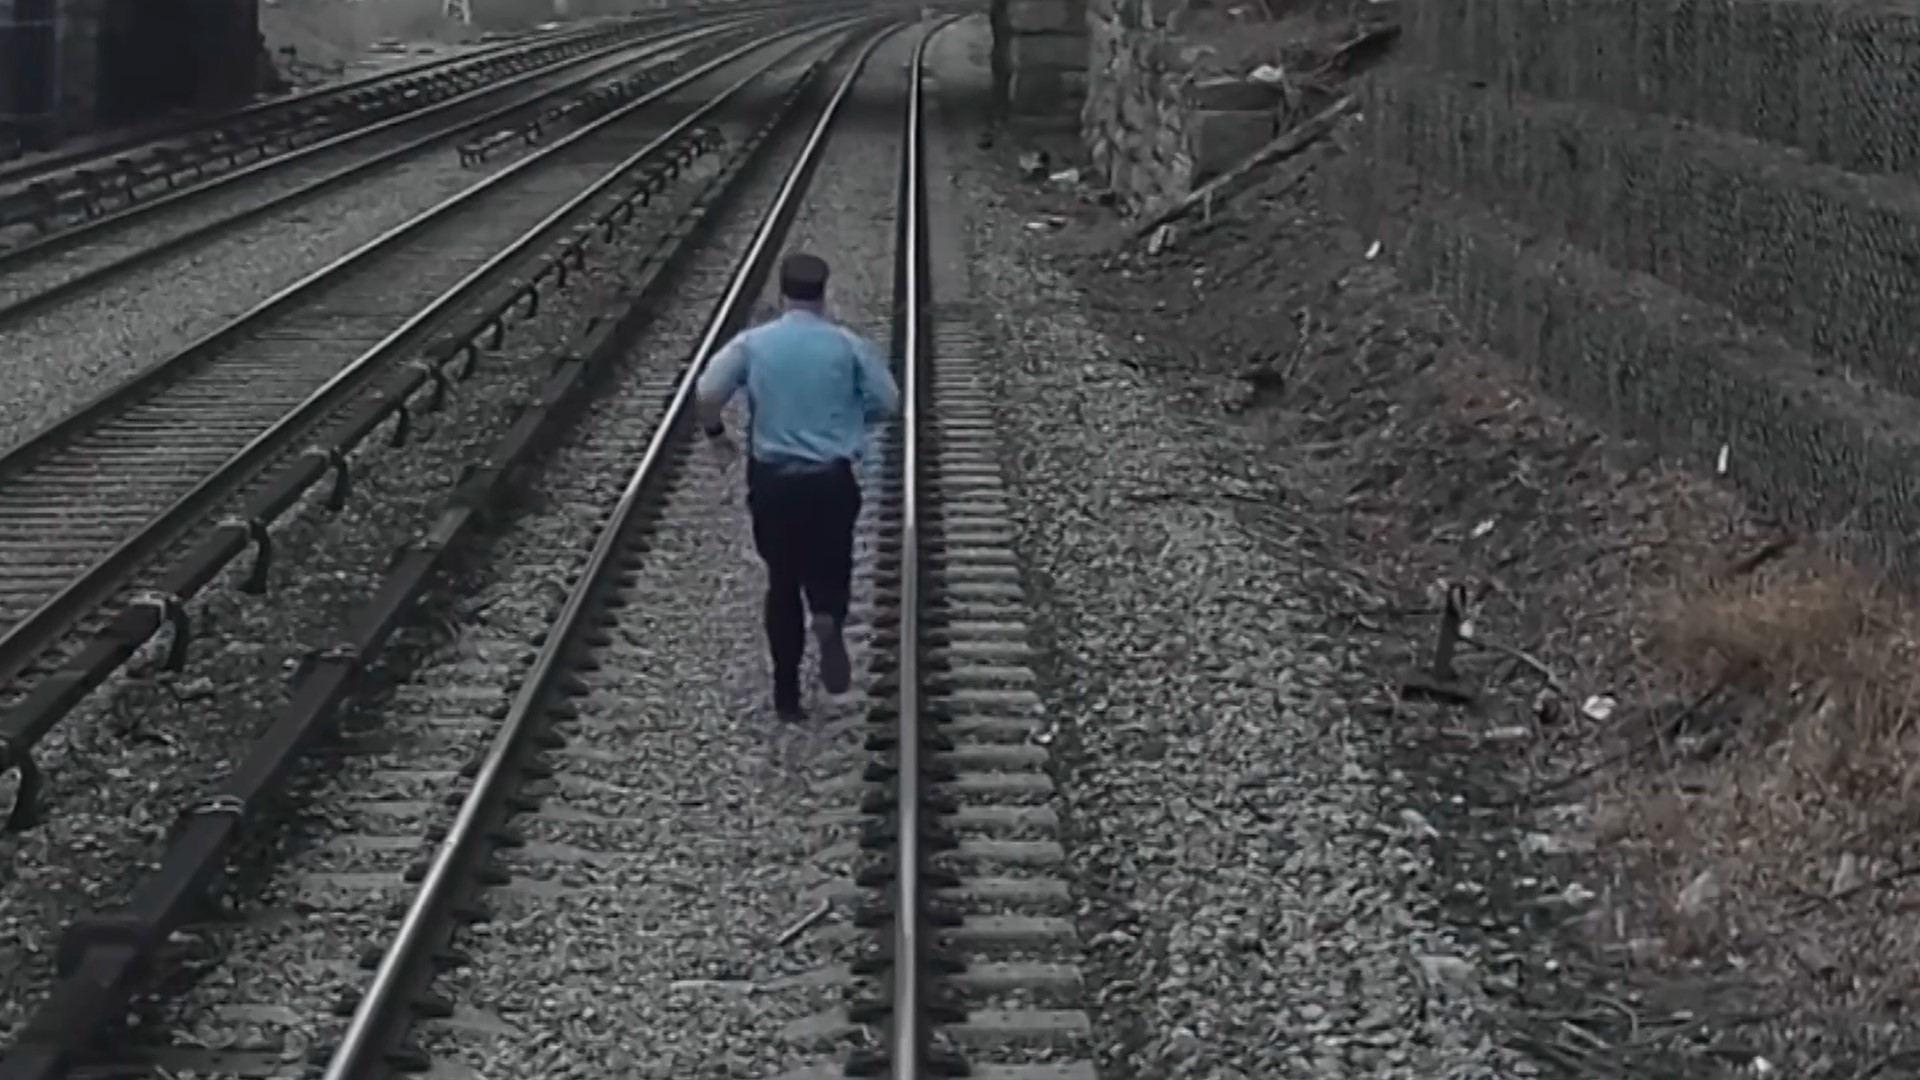 A railroad conductor in New York sprinted to scoop up a 3-year-old boy who had wandered dangerously close to the electrified third rail, officials said this week.